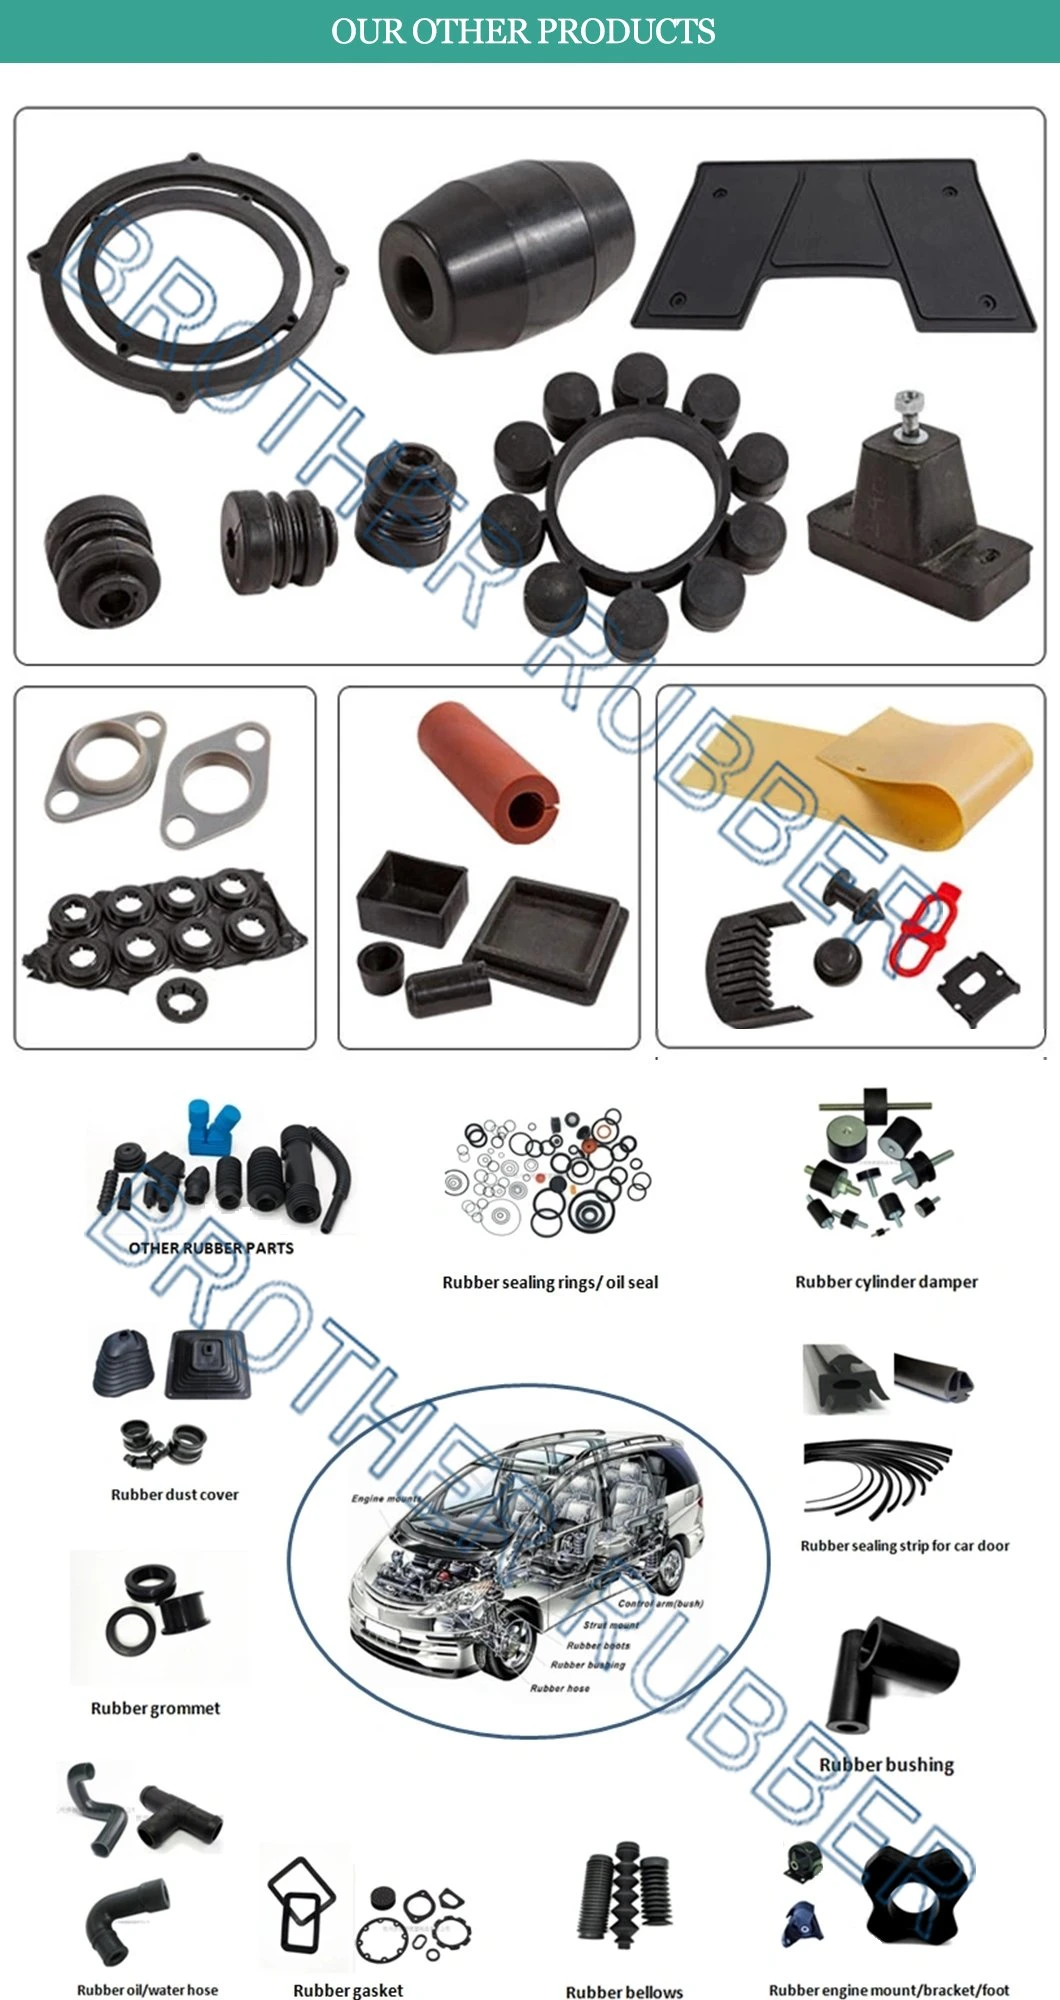 OEM Factory Rubber /Natural Rubber/Custom Auto Rubber Bushing